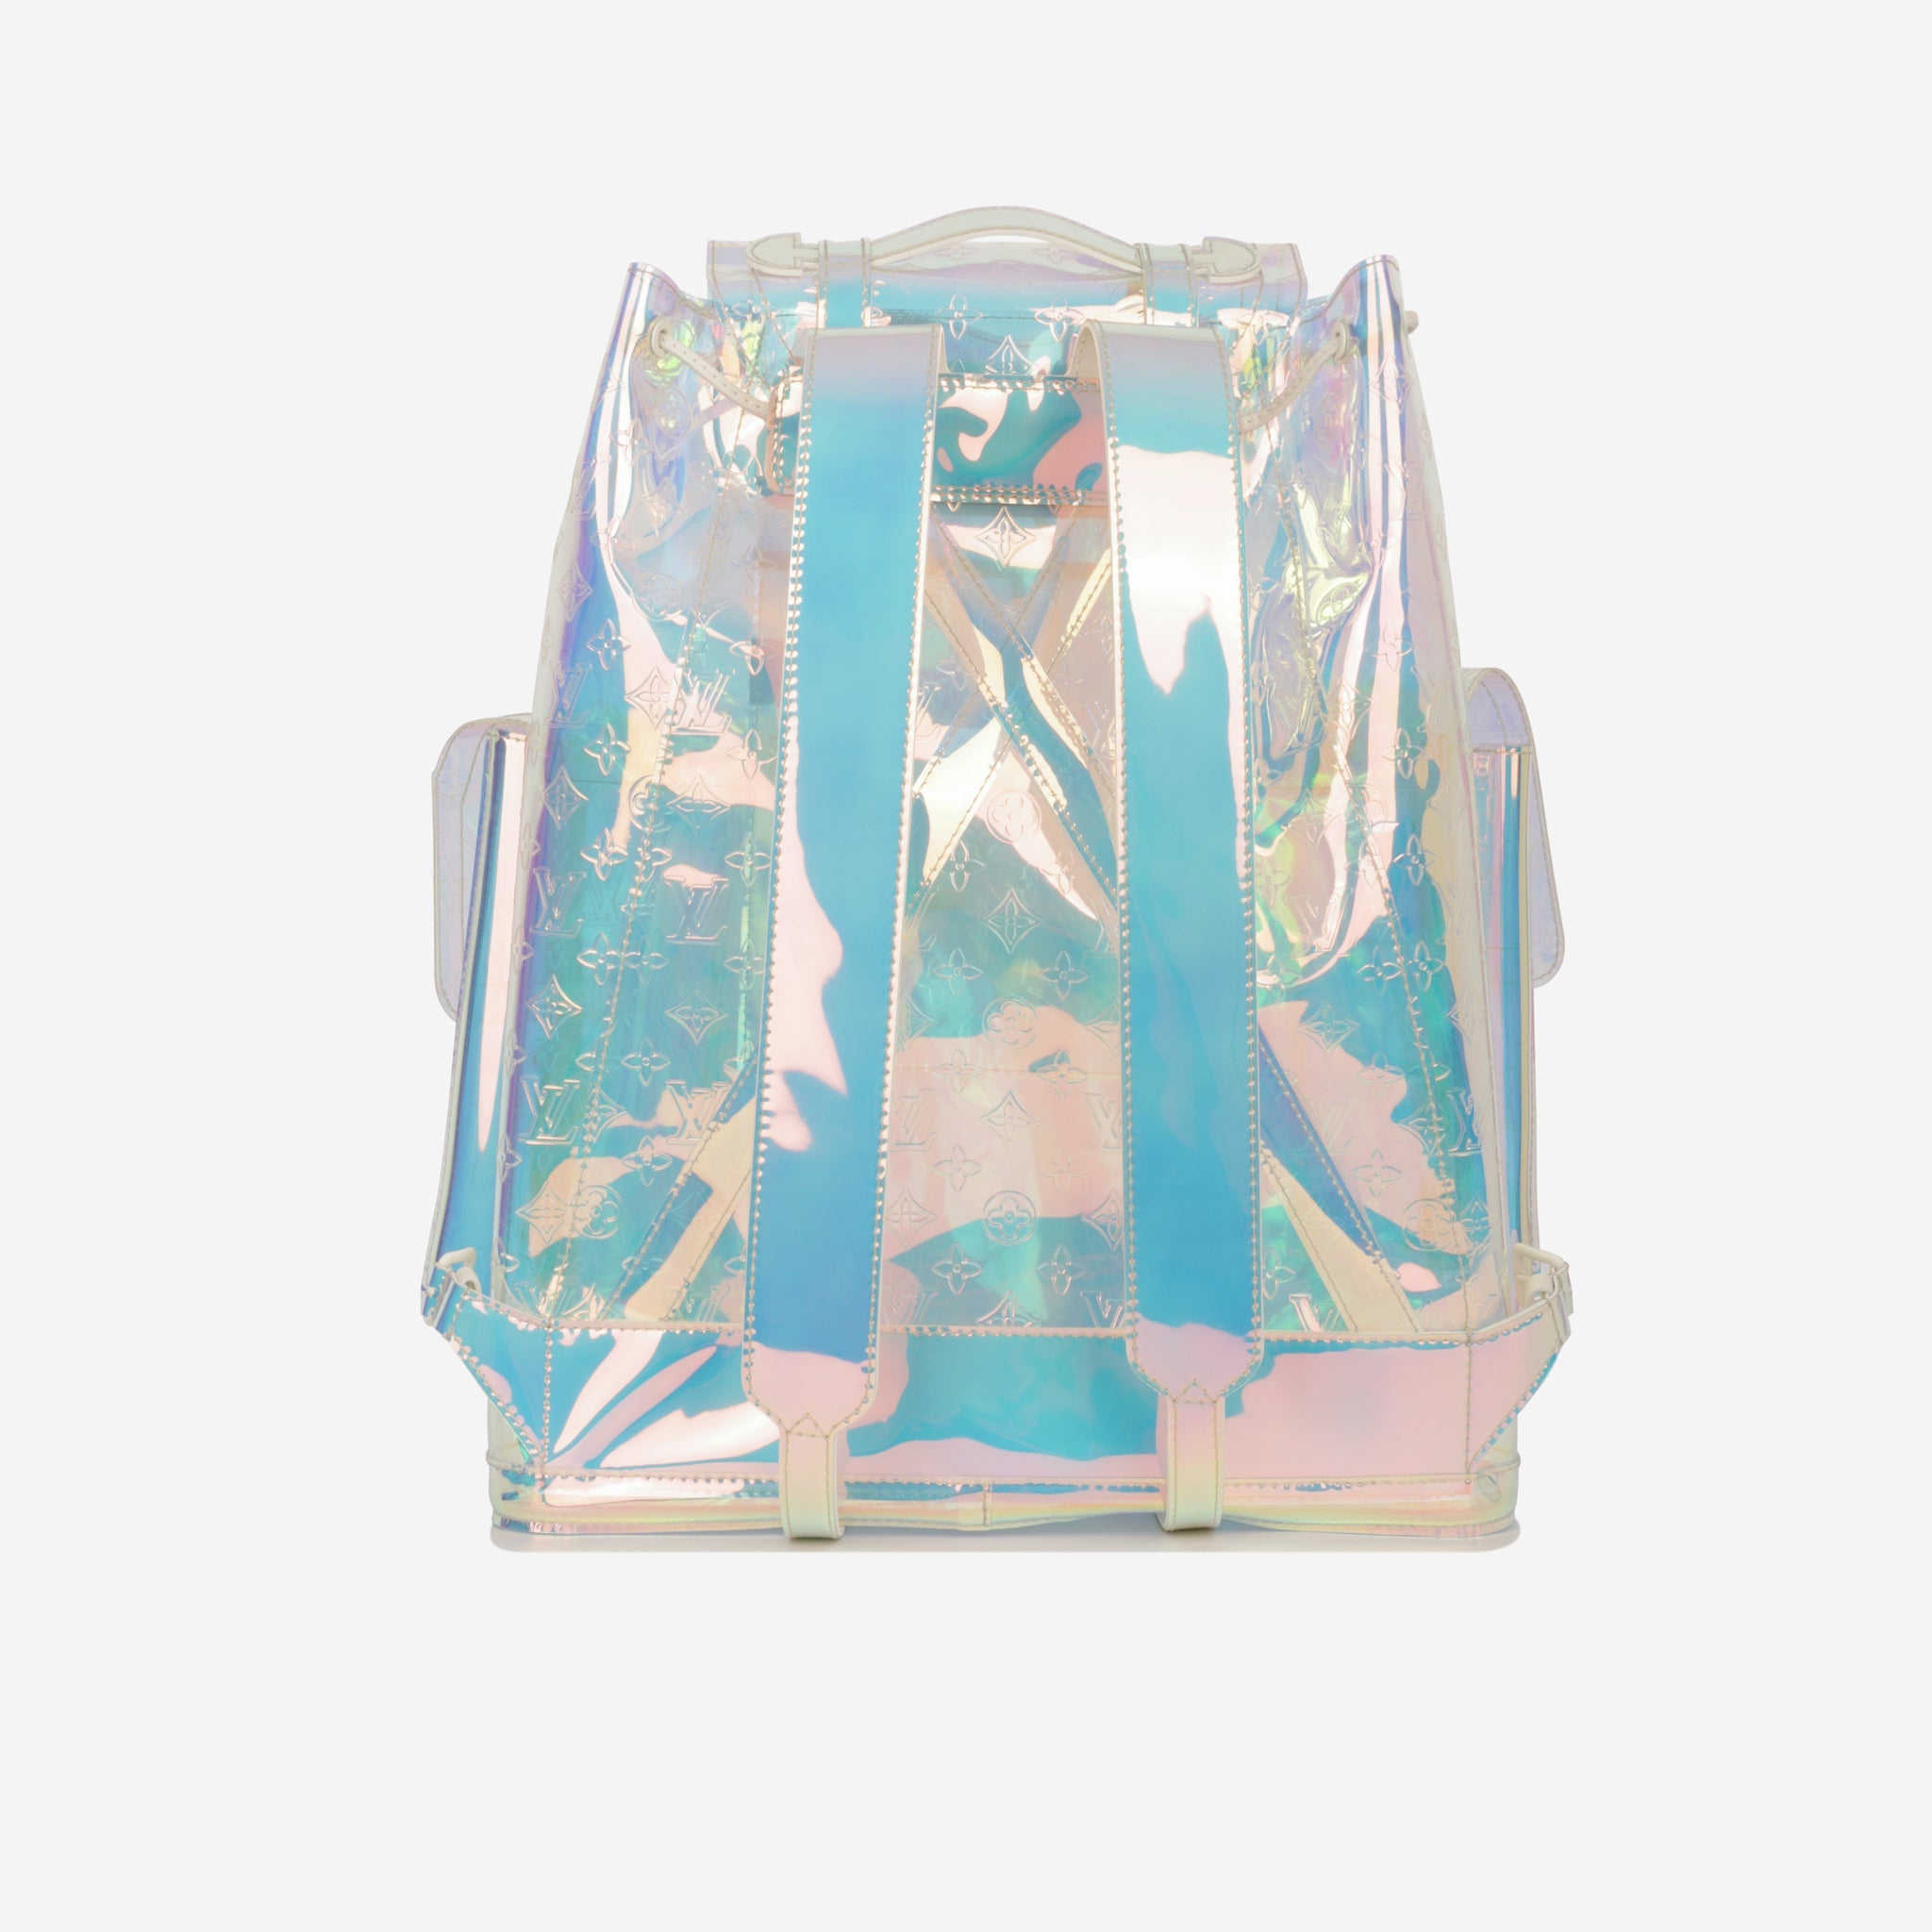 Louis Vuitton pre-owned x Virgil Abloh Prism Christopher Backpack - Farfetch